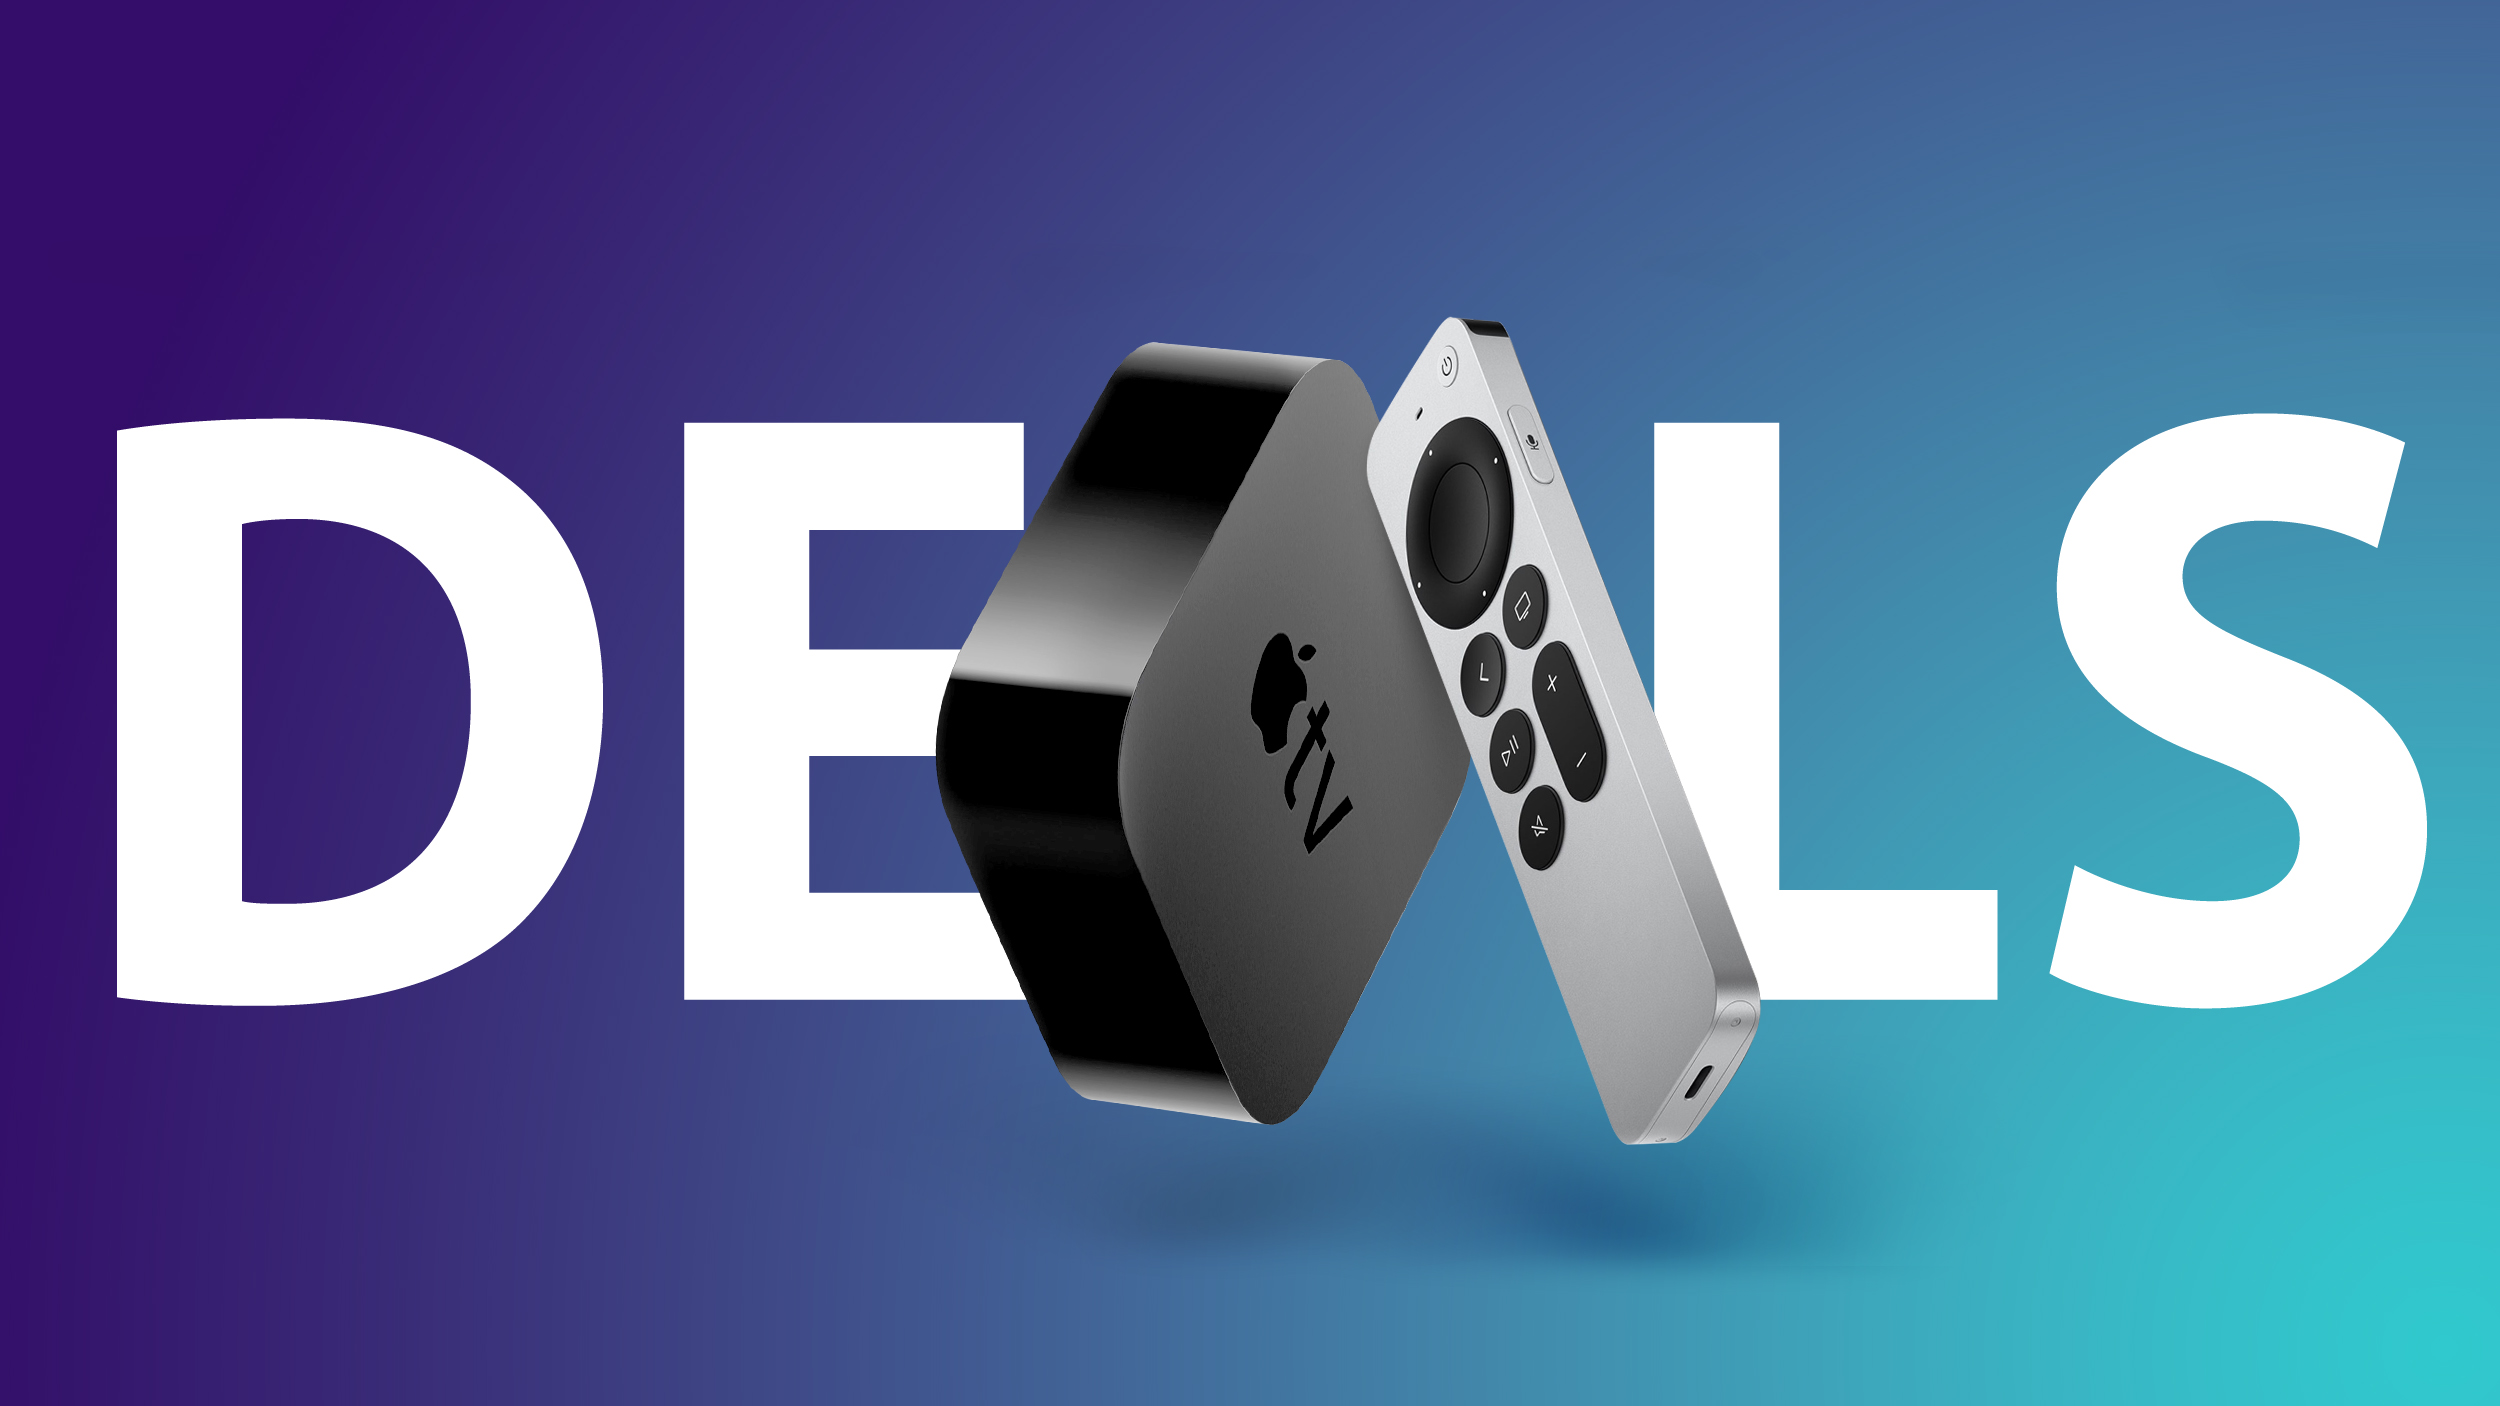 Deals: 2021 Apple TV 4K Hits New Record Low Price at $99.99